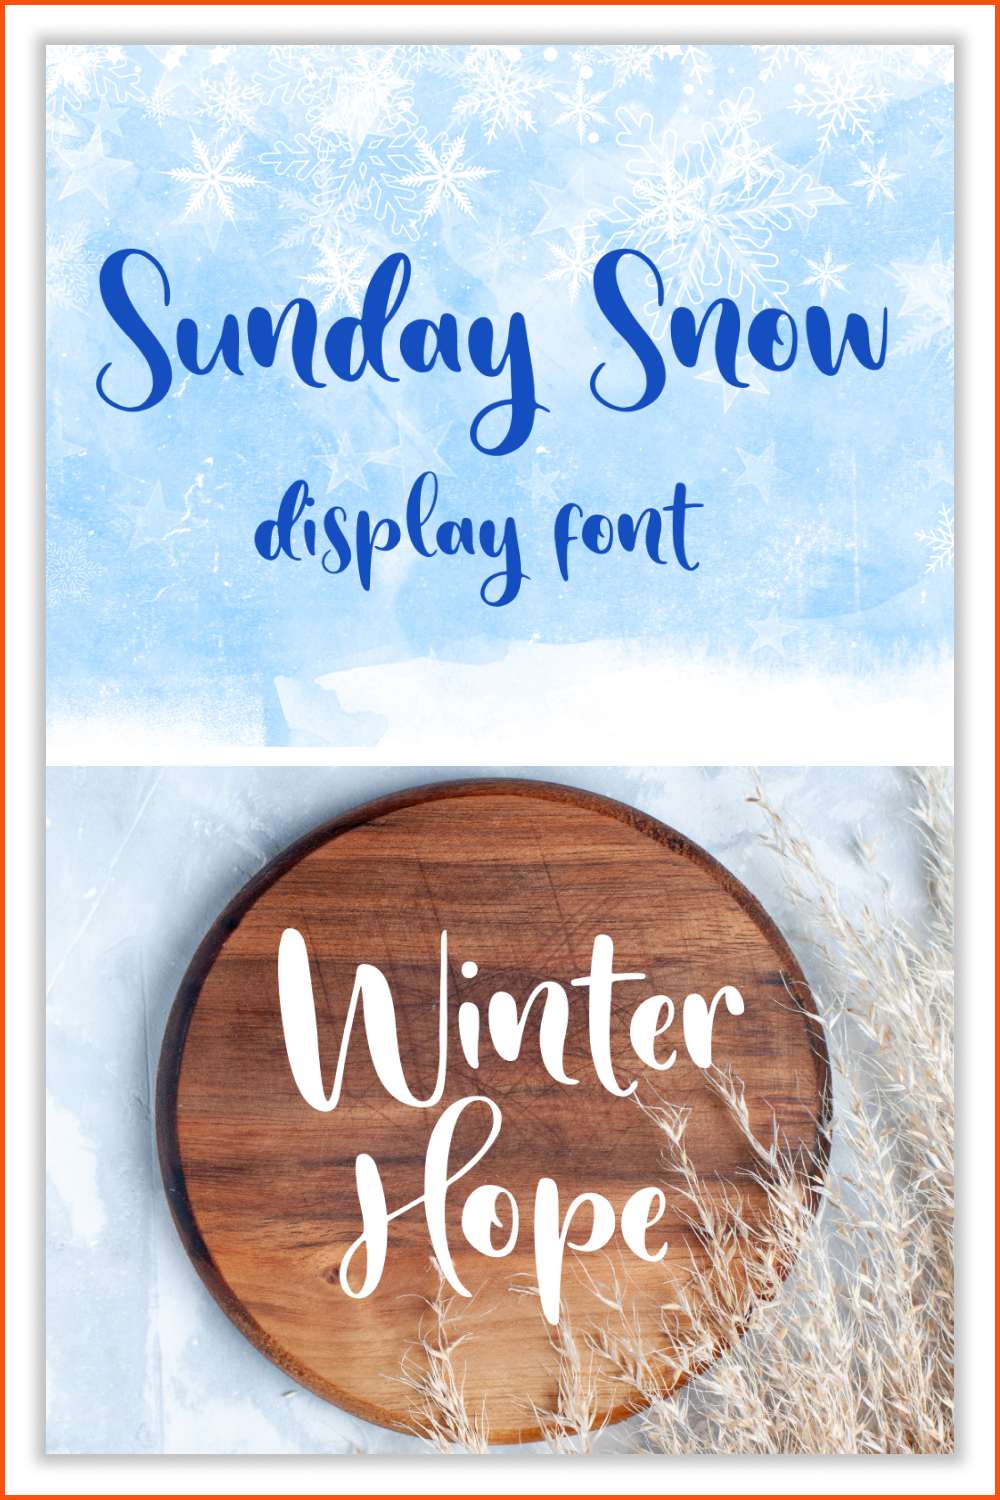 An example of a font against a frozen glass background.